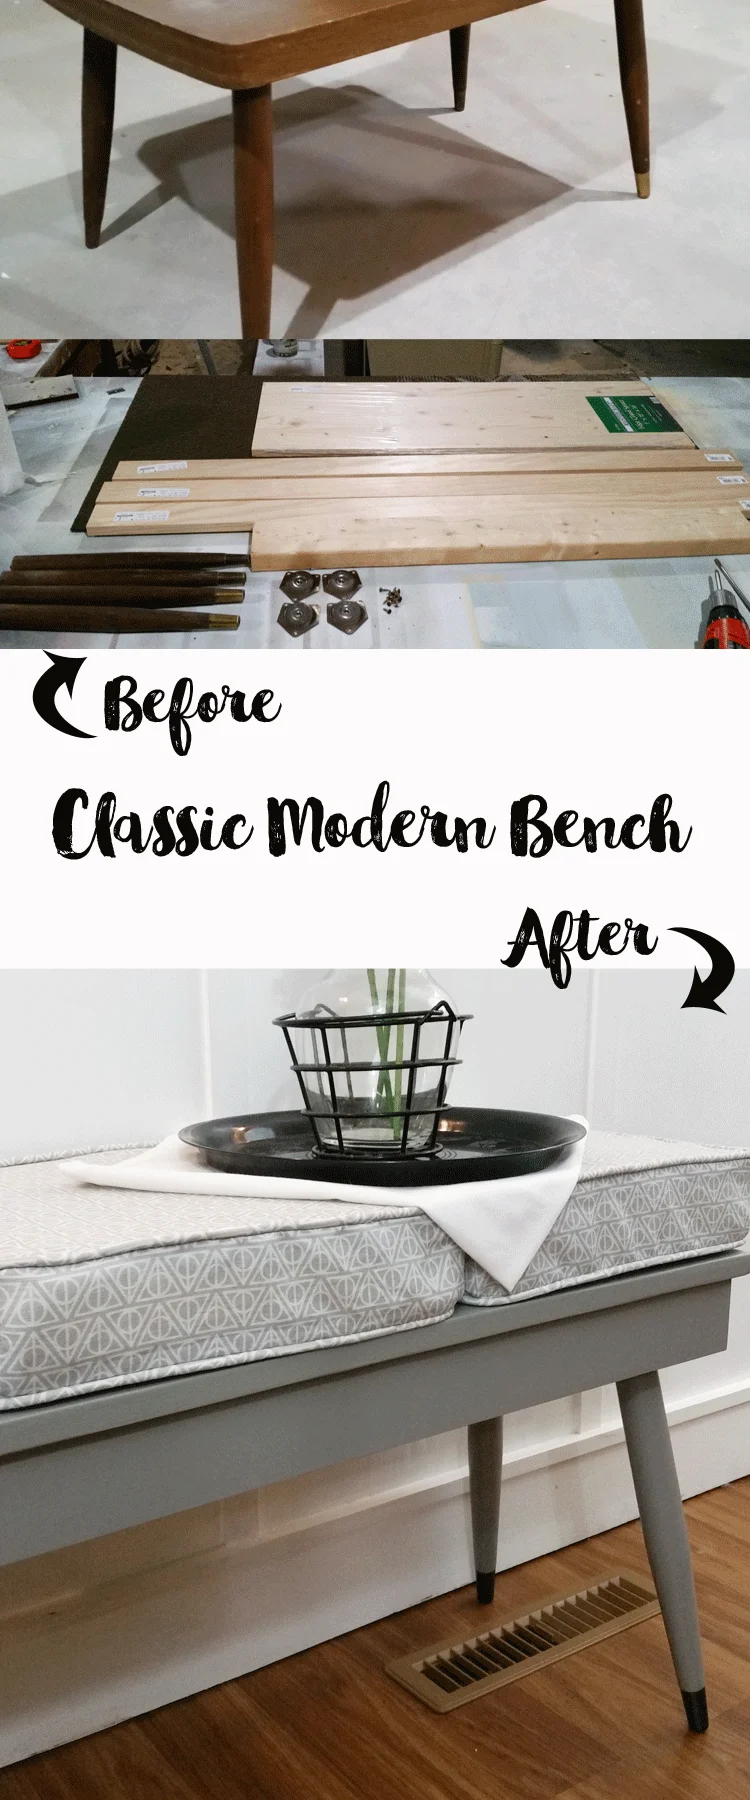 Modern-Bench - www.michellejdesigns.com - I sewed my way to the most fun modern bench ever!